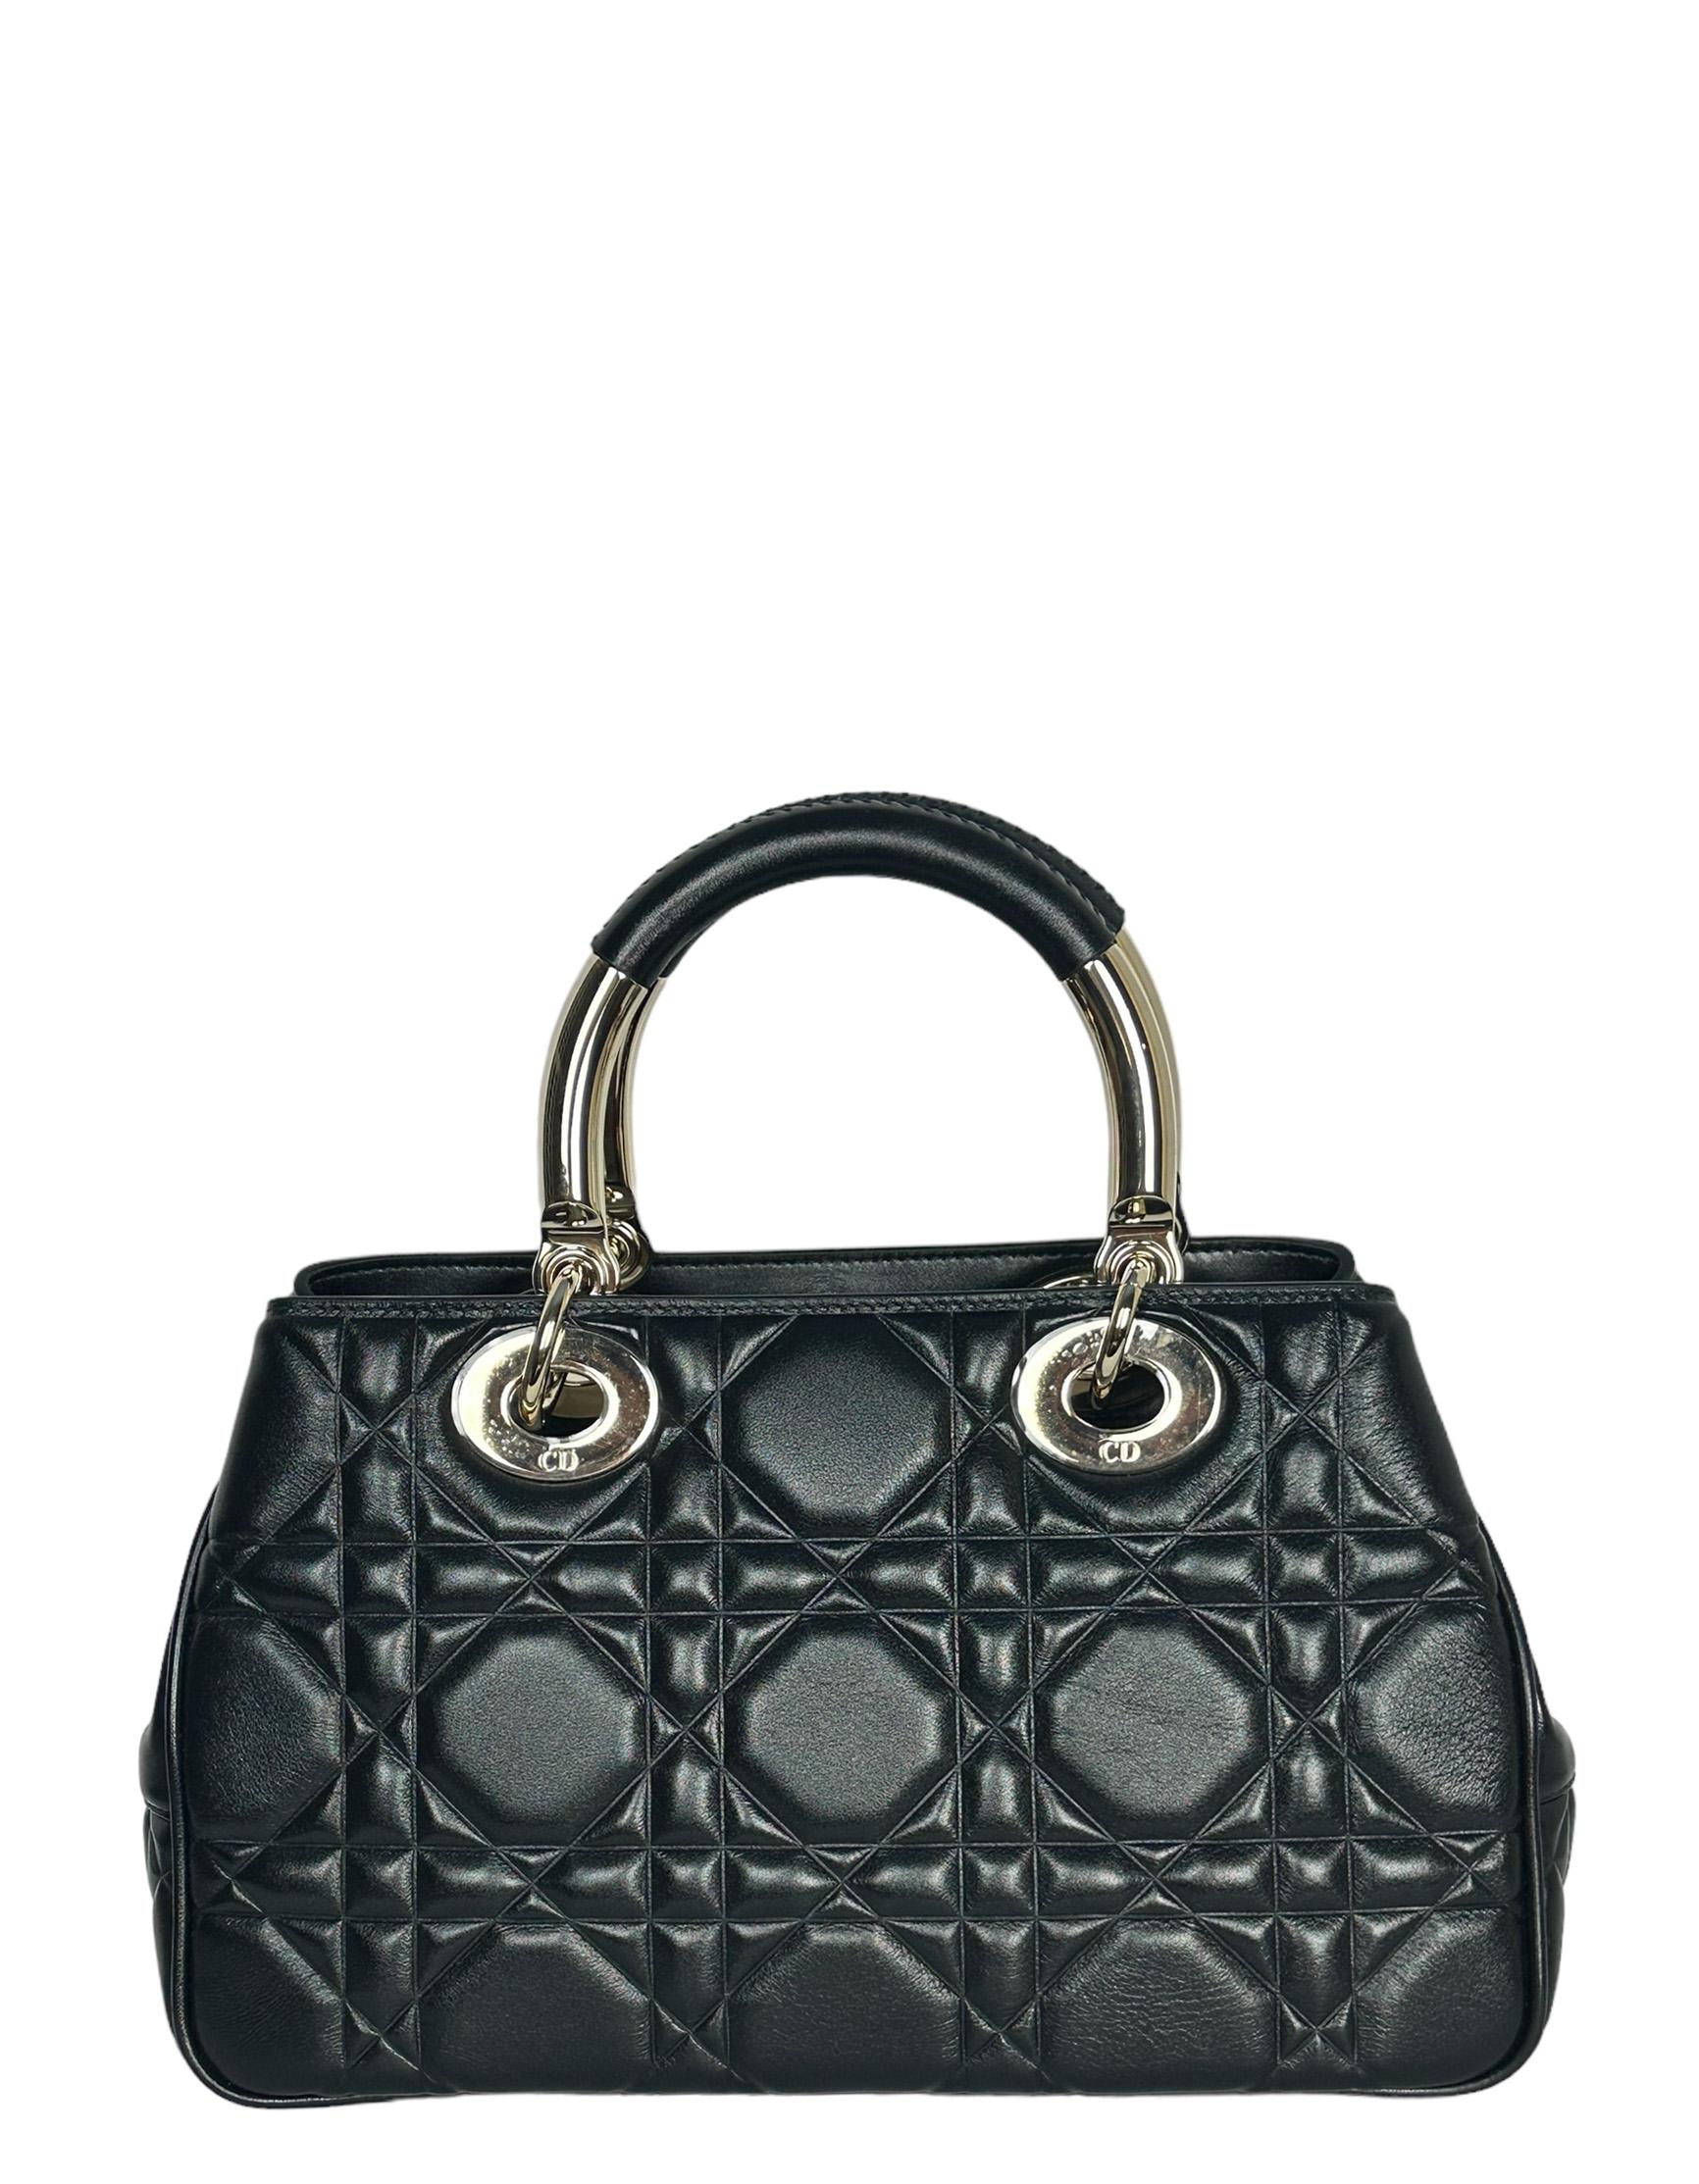 Christian Dior Black Leather Cannage Quilted The Lady 95.22 Bag rt. $7200 In Excellent Condition For Sale In New York, NY